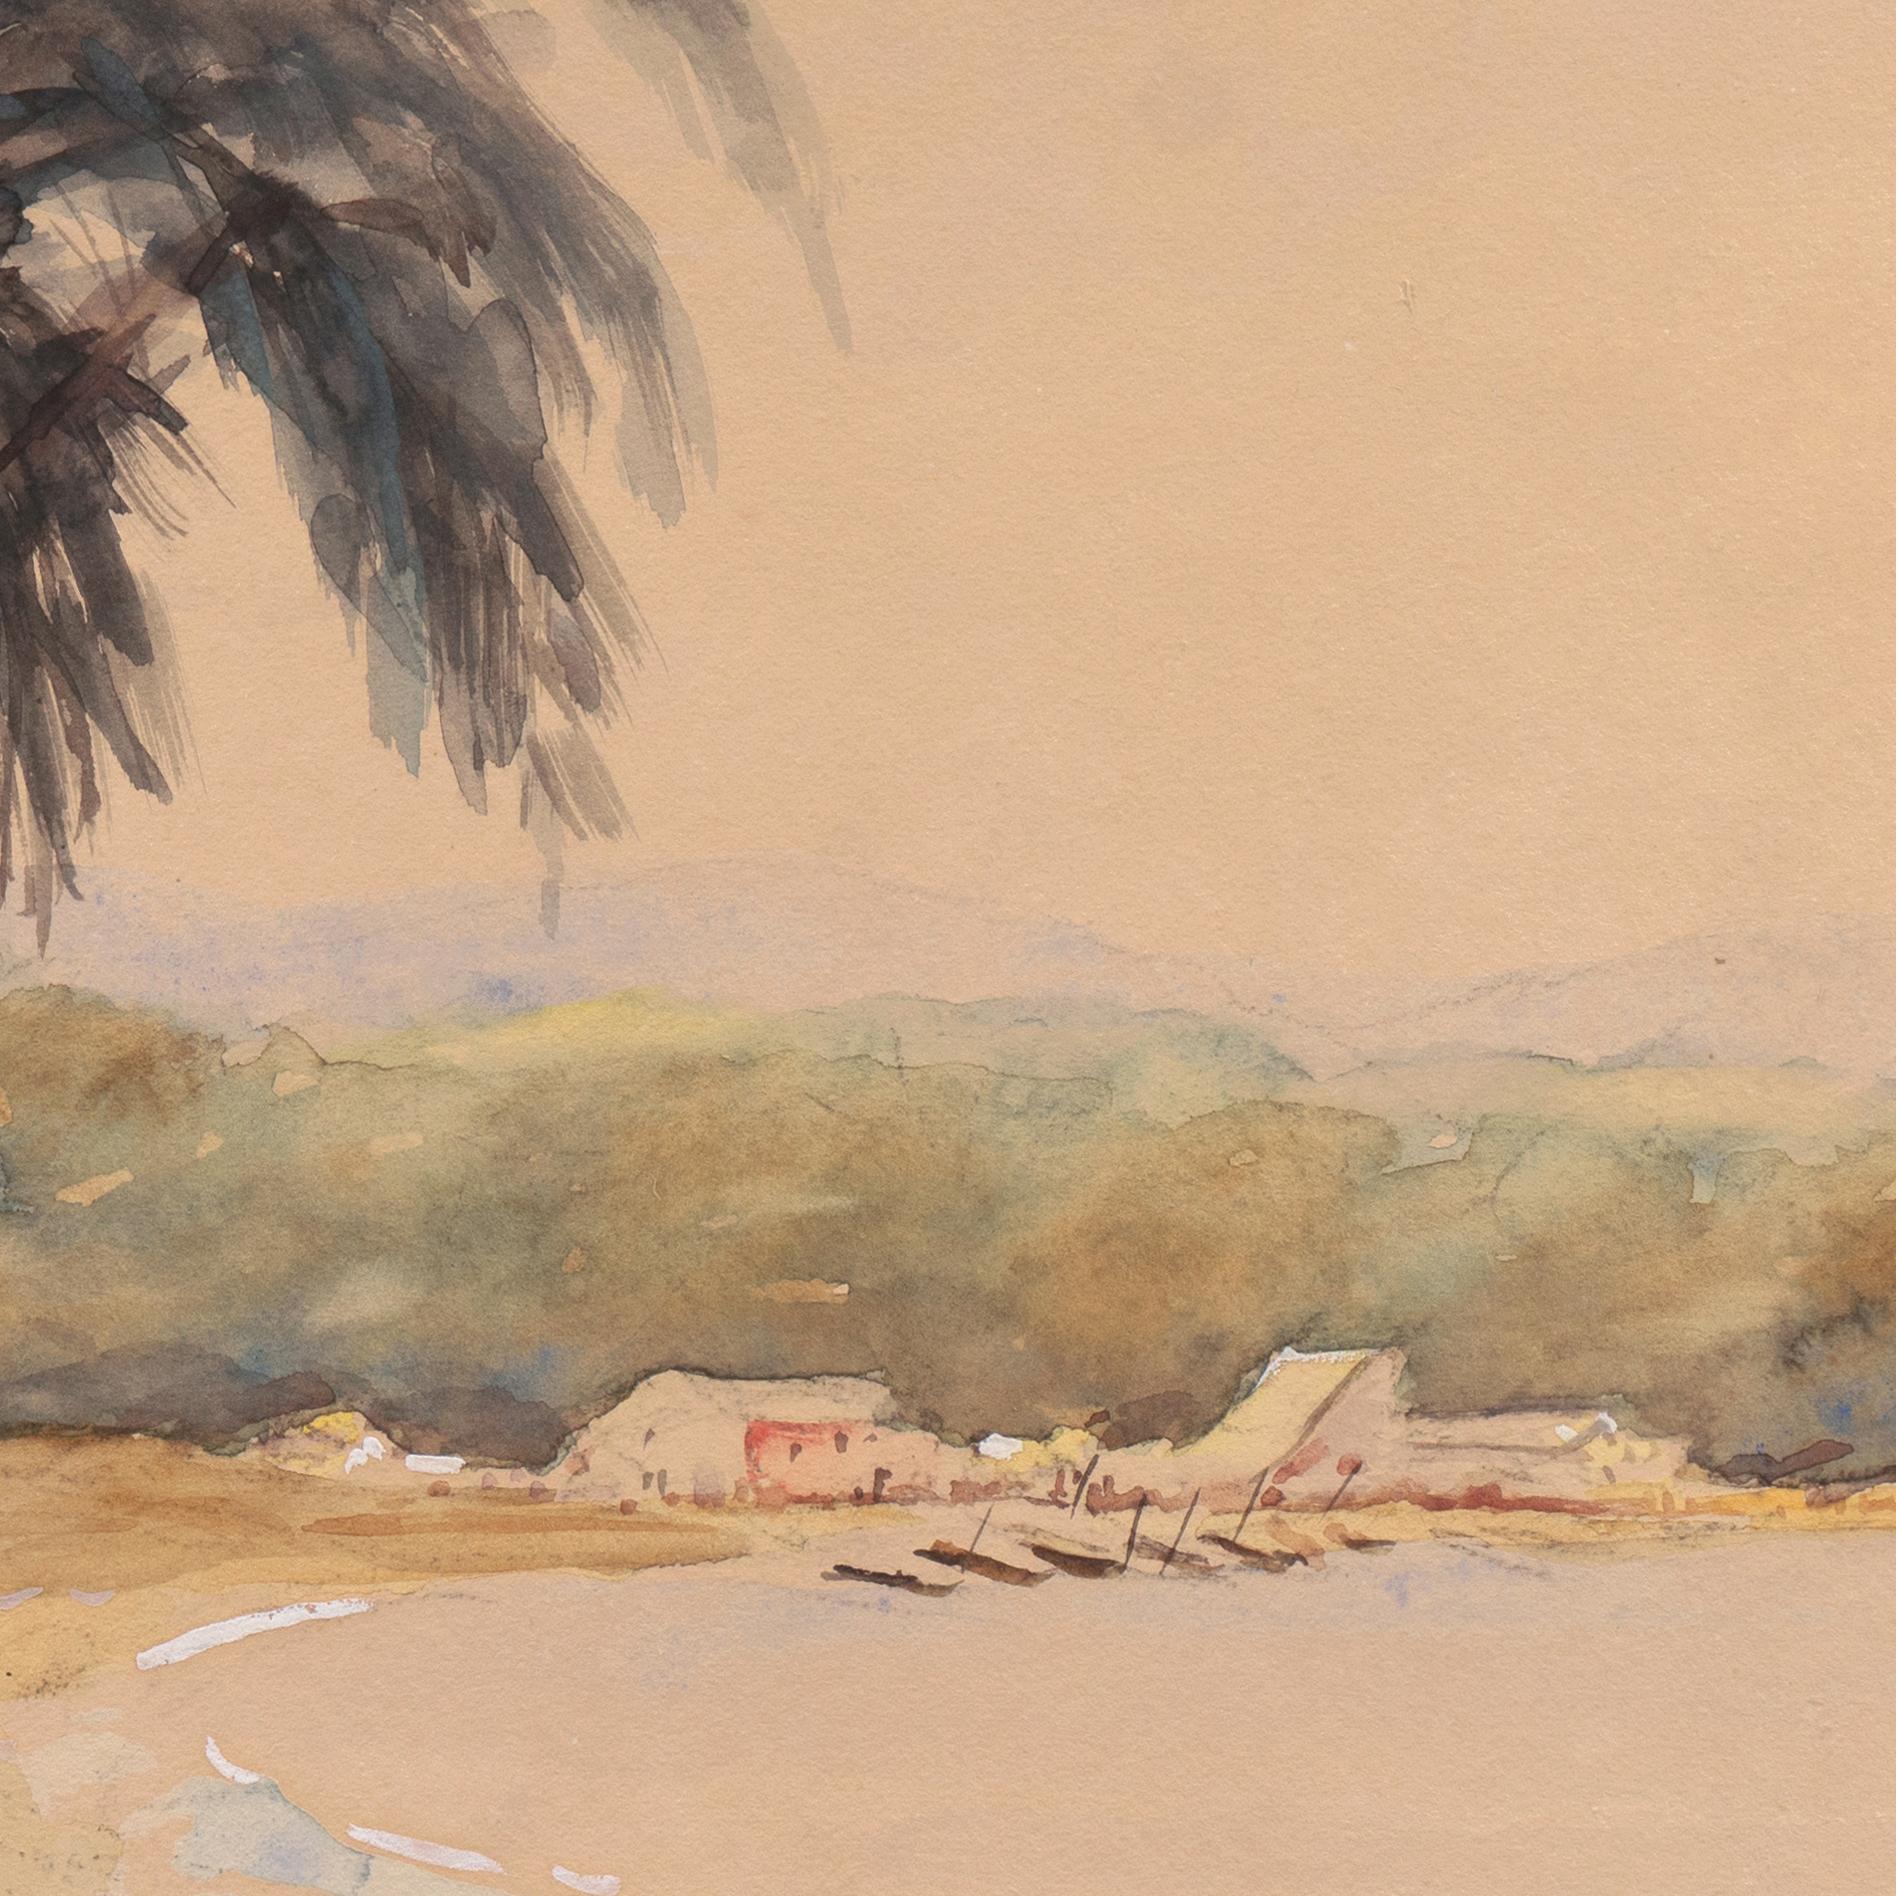 Signed lower right, 'T. Dentz' and painted circa 1910.

A sensitively painted coastal landscape, perhaps Caribbean, showing a panoramic view of a cove with palm trees in the foreground, two fishermen at the water's edge and wooded hills rising